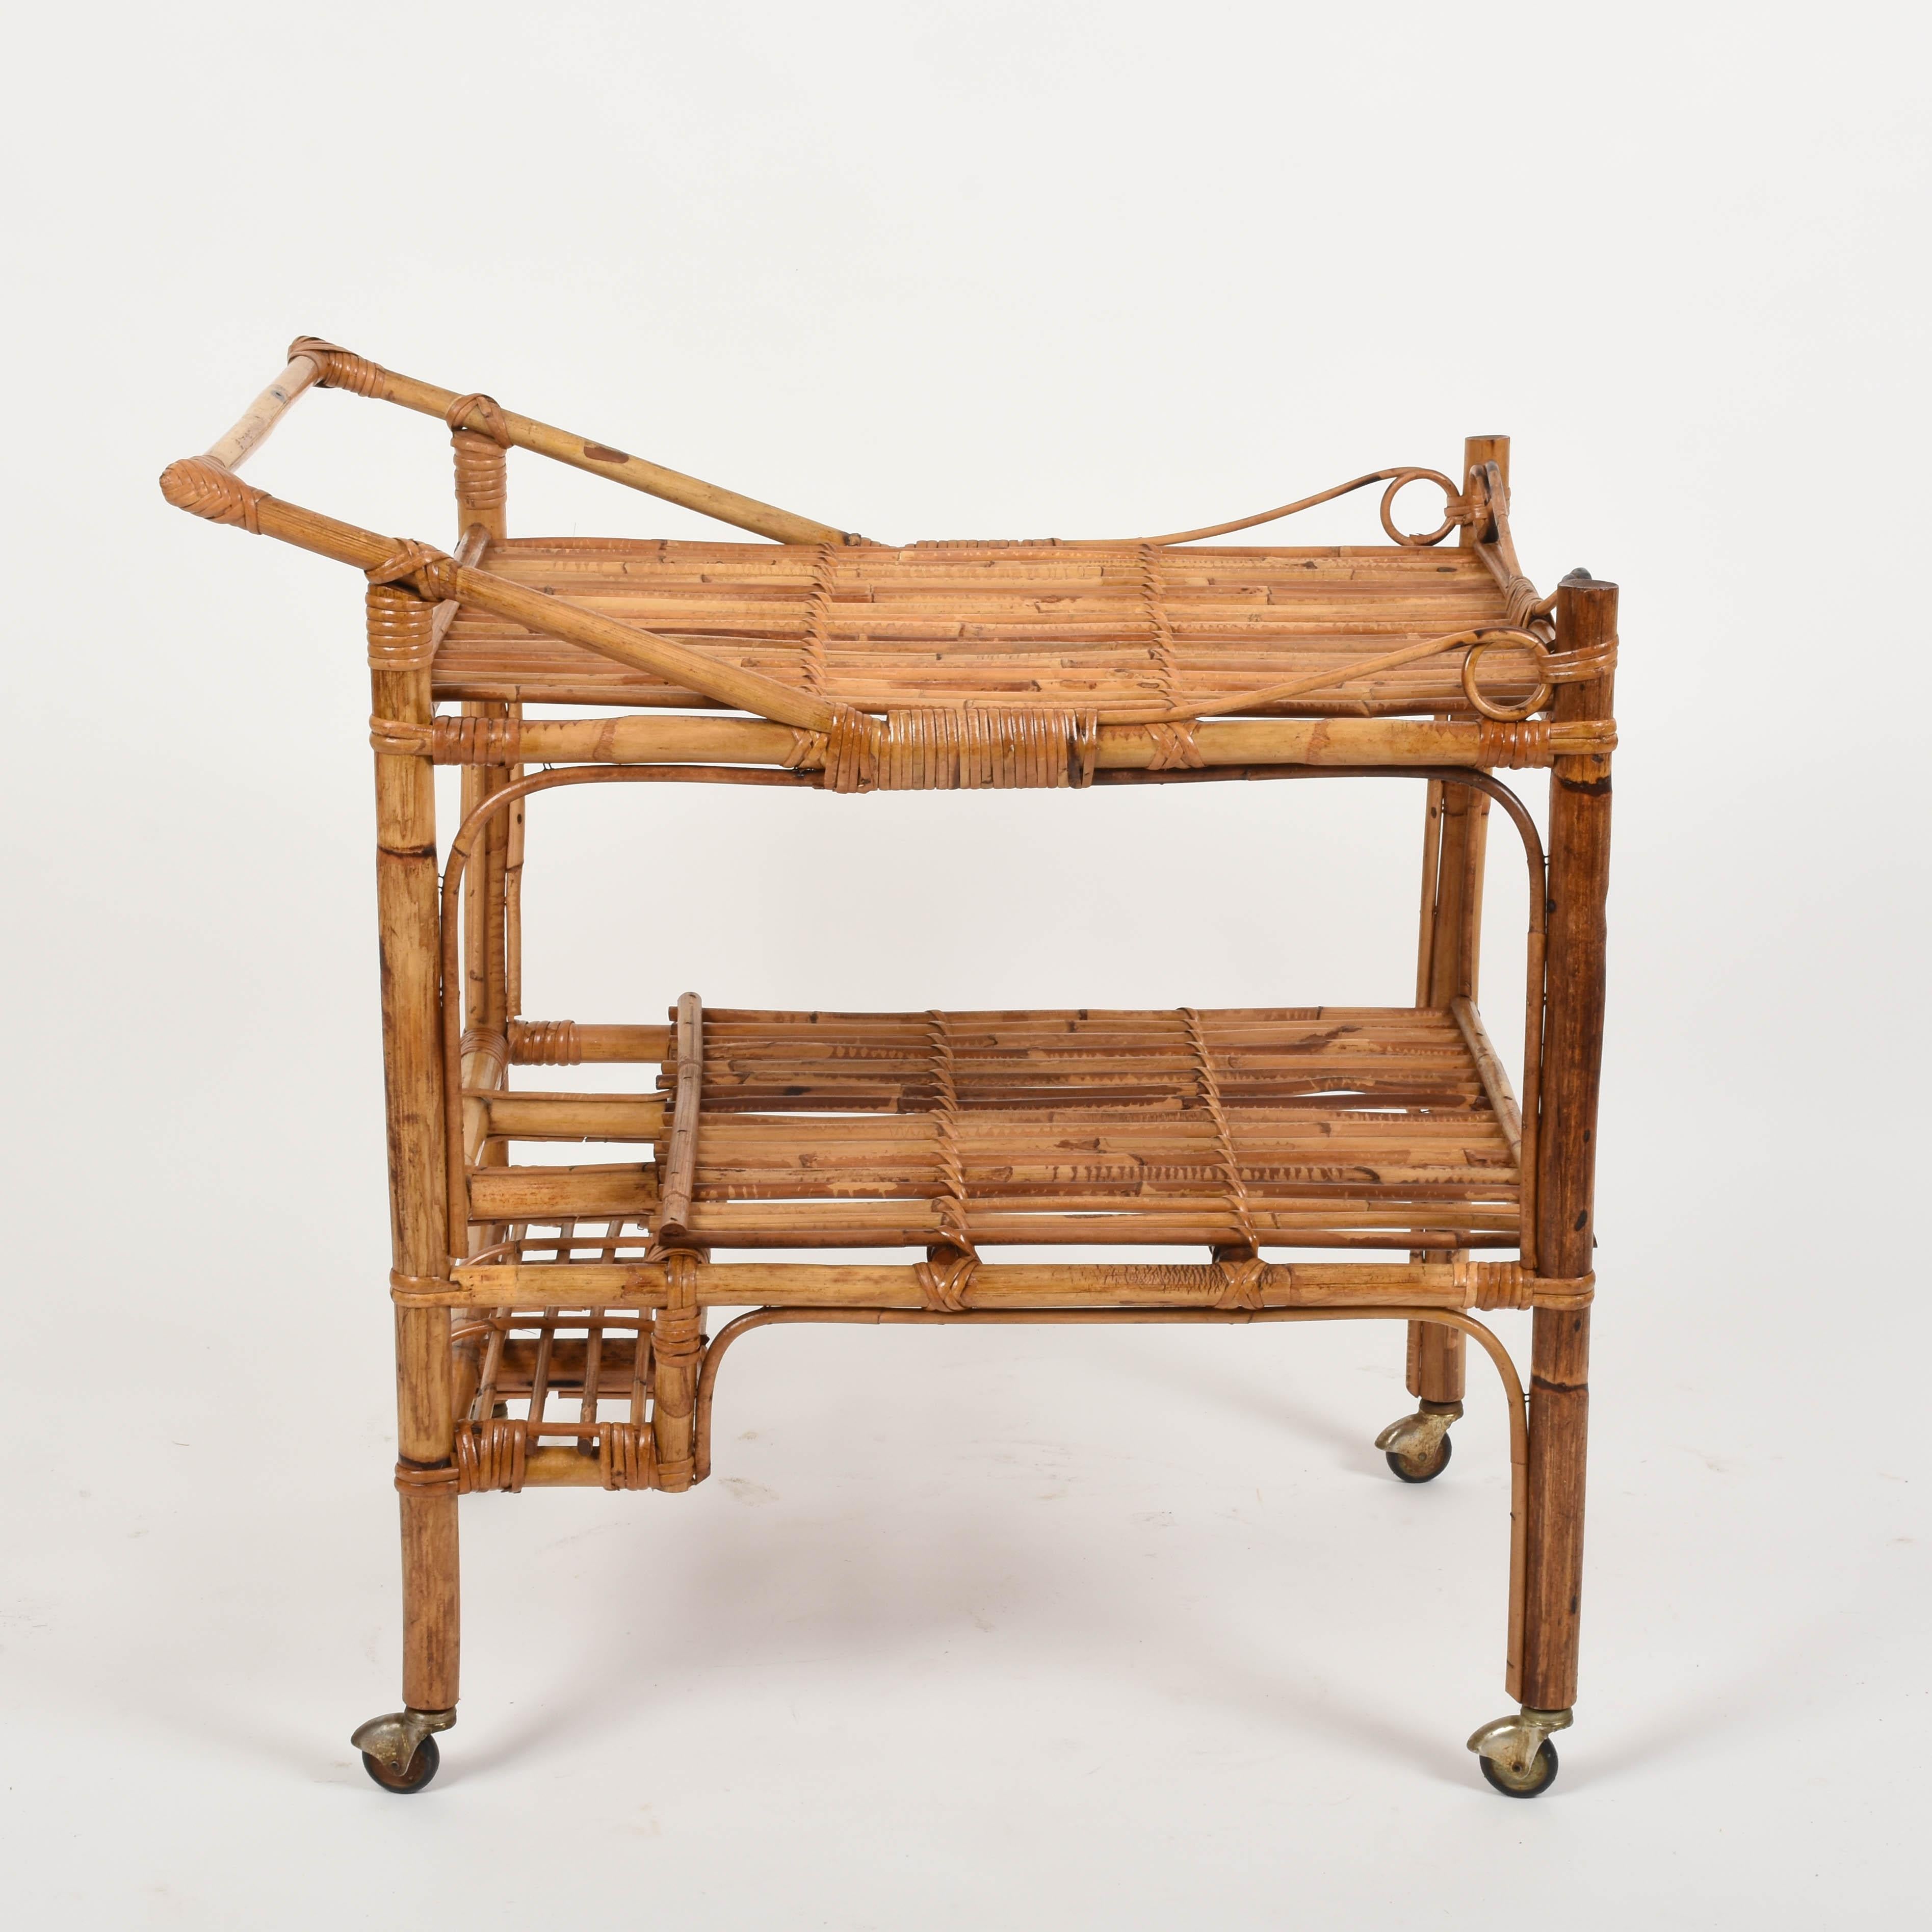 Fabulous French Riviera rectangular bamboo and rattan trolley bar cart. Bar cart from the 1960s. This amazing piece was designed and produced in France during 1960s.

This piece is unique as it has the main structure in bamboo and the surfaces in